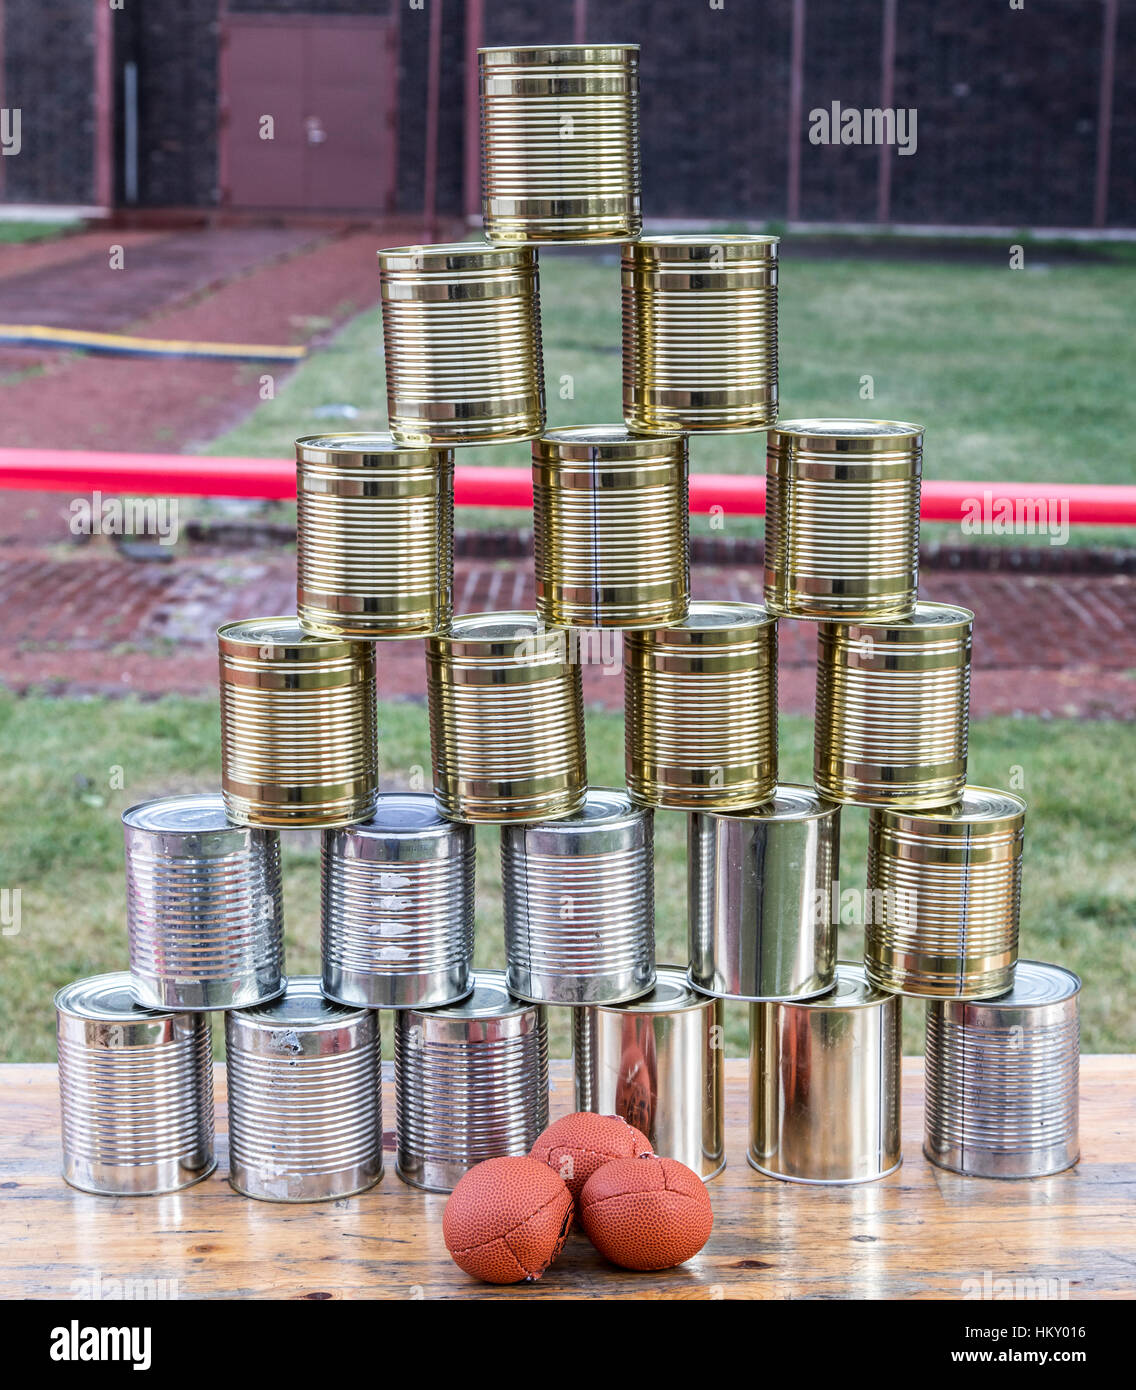 Cans, empty tin cans, built to a pyramid, at a children's party, throwing balls, Stock Photo